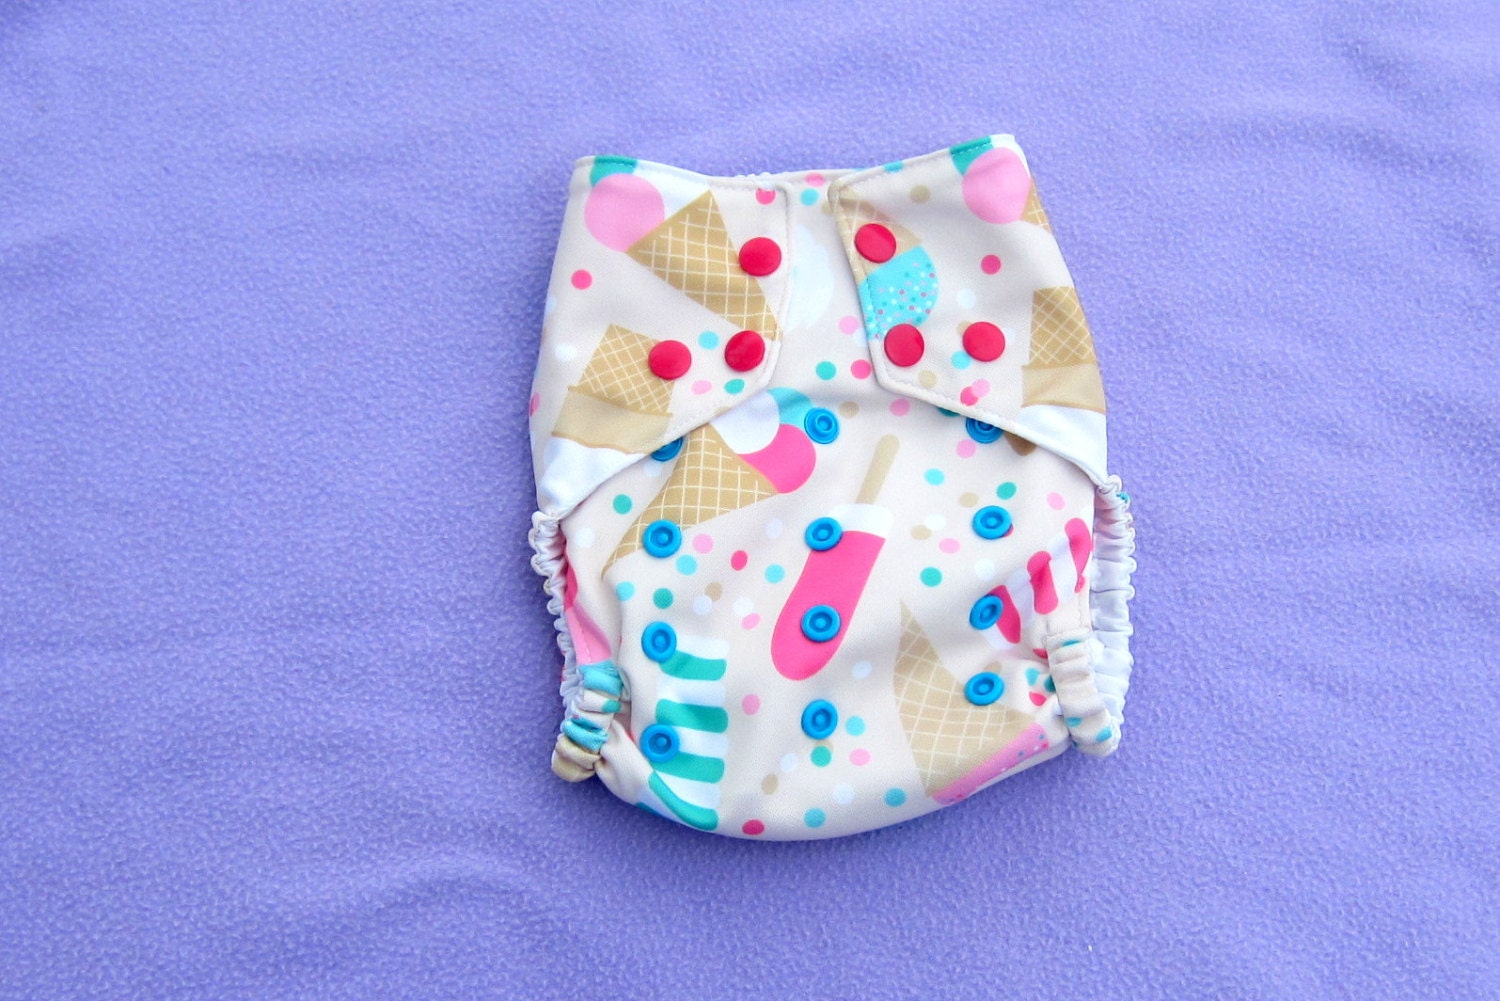 Cloth Diaper Cloth Nappy Diaper Baby Diapers Ice by KiwiCheeks